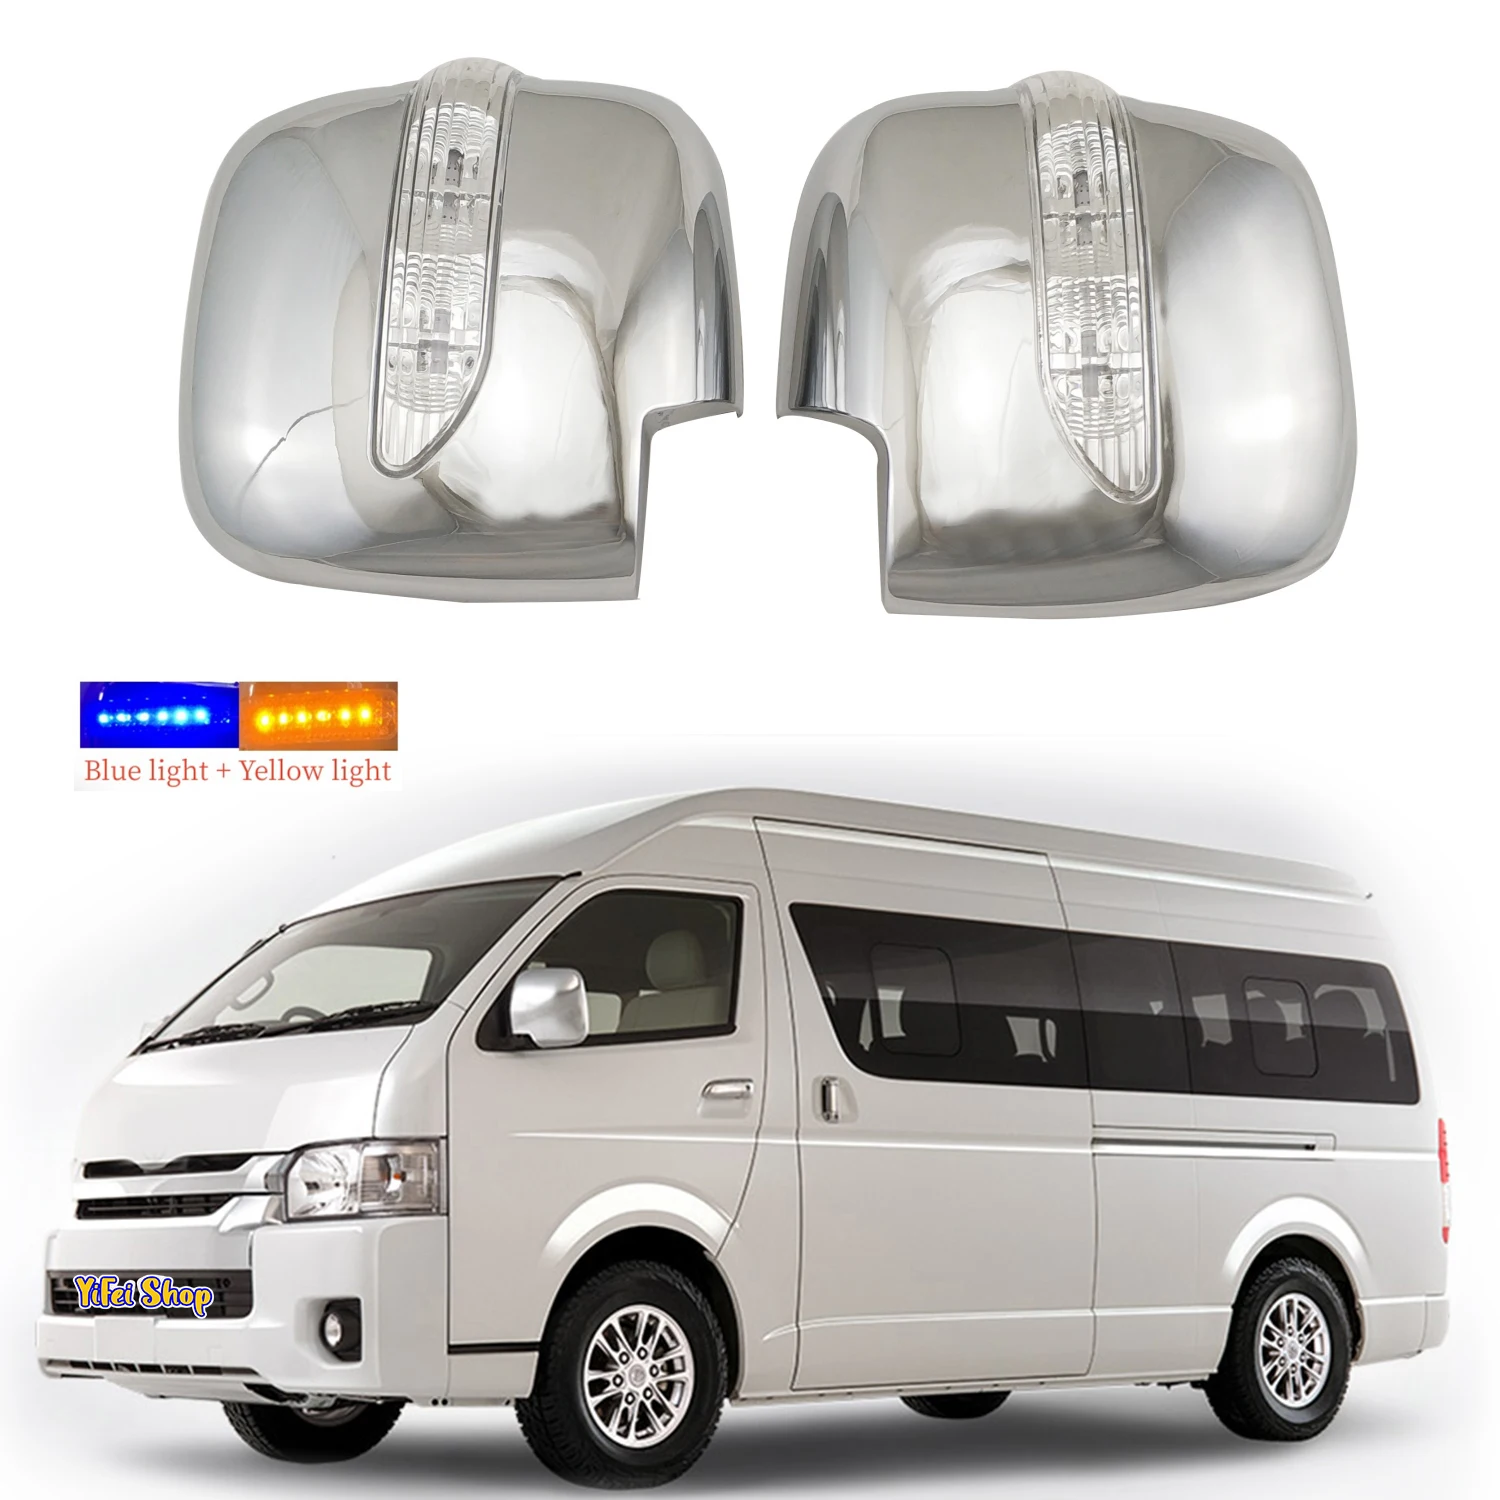 

2pcs Car ABS Chrome Rearview Accessories Plated Trim 2005-2012 2014 2016 For Toyota Hiace Commuter Door Mirror Cover With LED